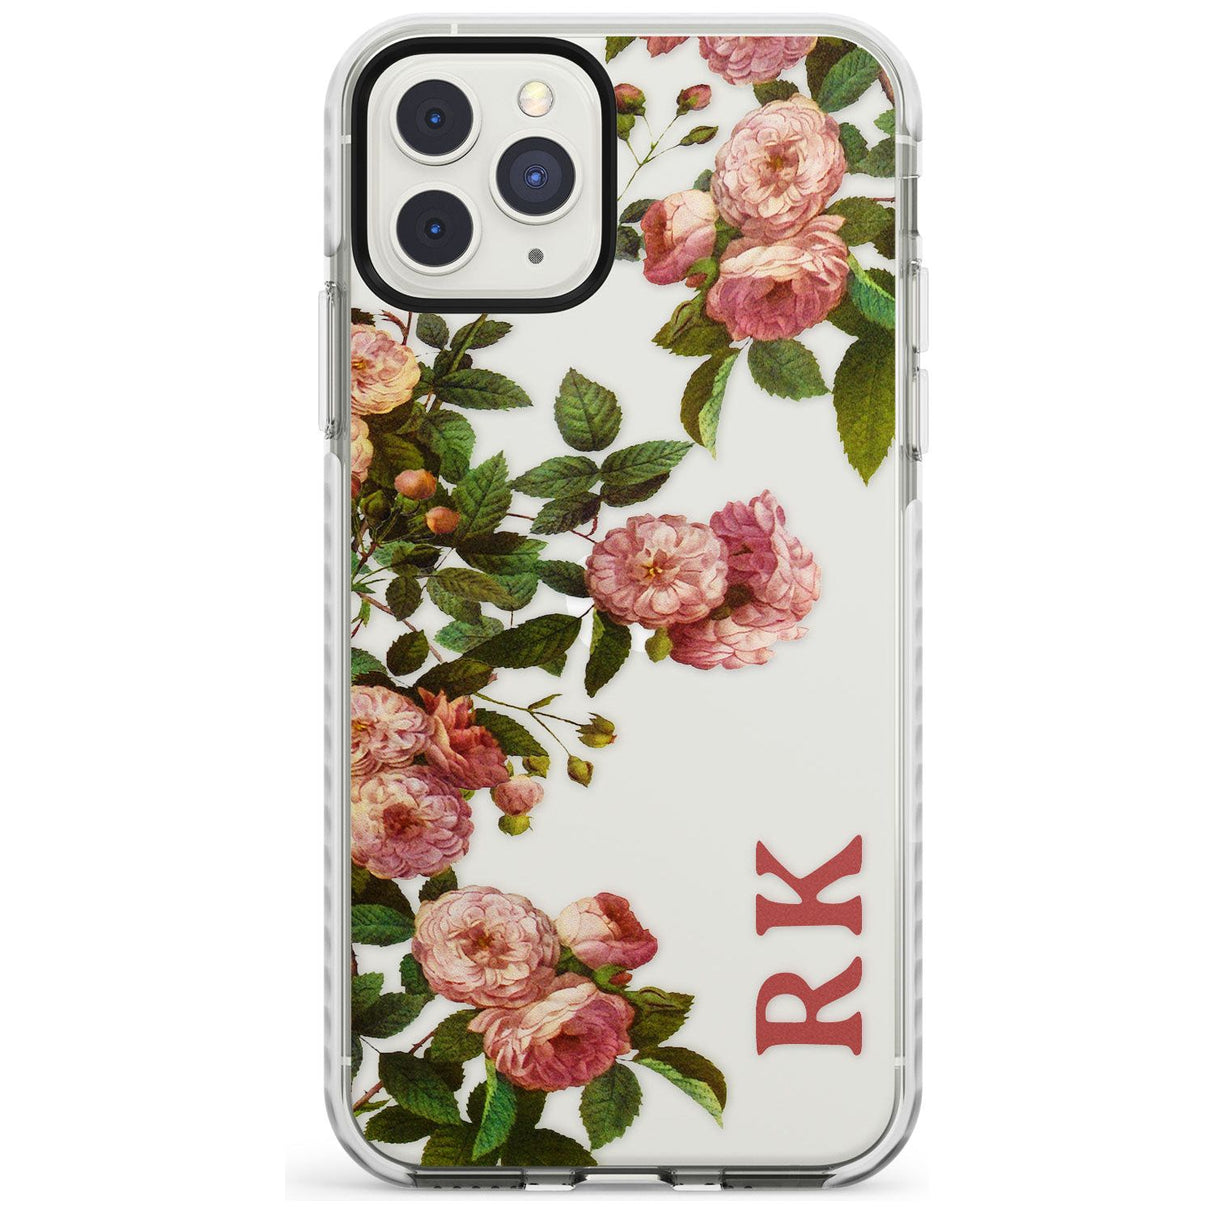 Custom Clear Vintage Floral Pink Garden Roses Impact Phone Case for iPhone 11 Pro Max